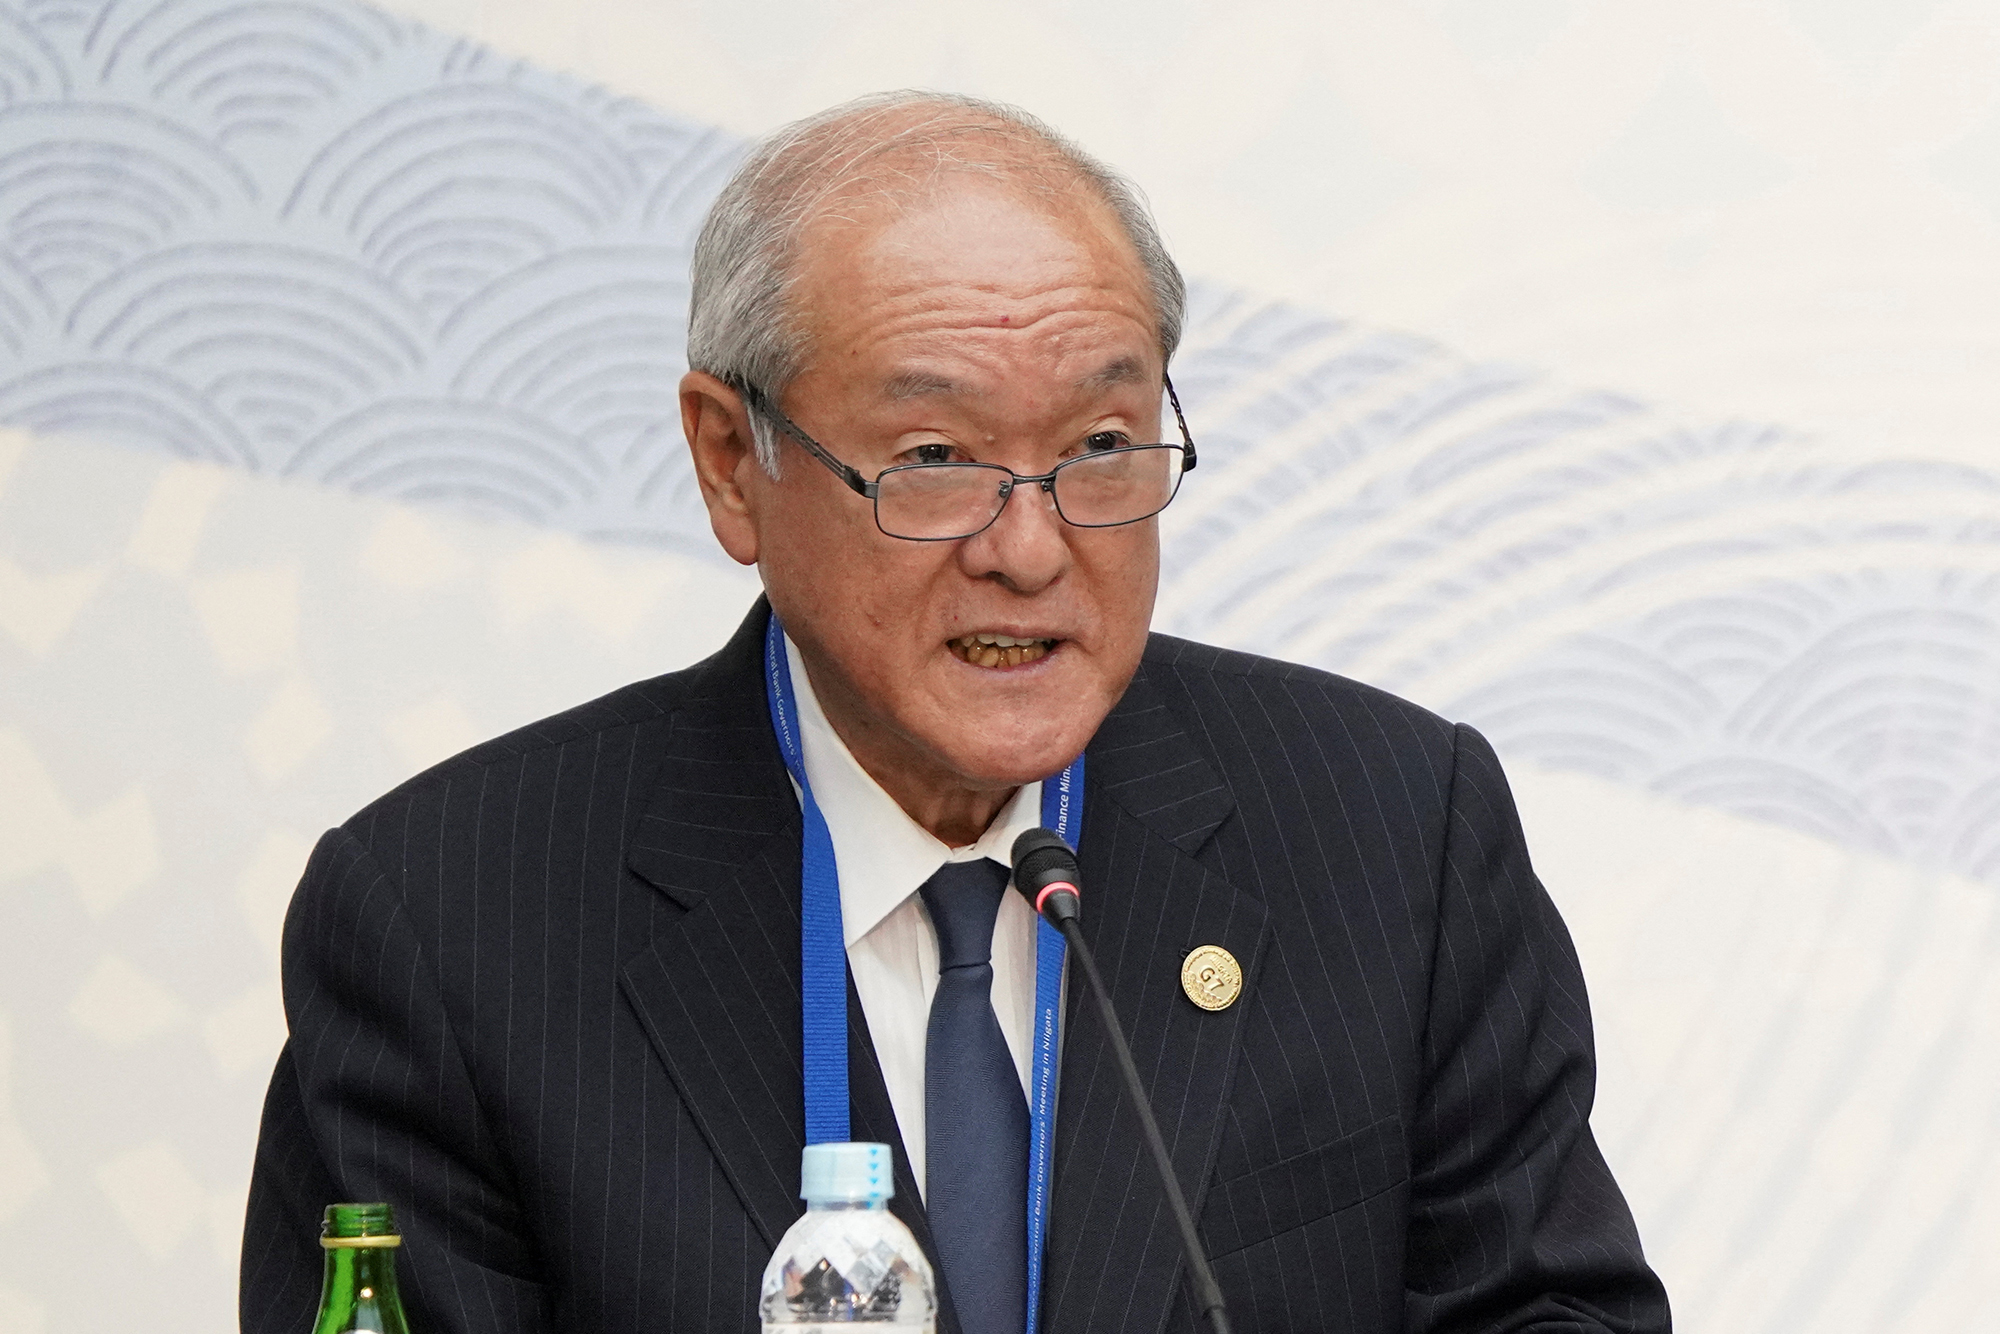 Japan's Finance Minister Shunichi Suzuki delivers a speech at the G7 High-Level Corporate Governance Roundtable in Niigata, Japan, on May 11.